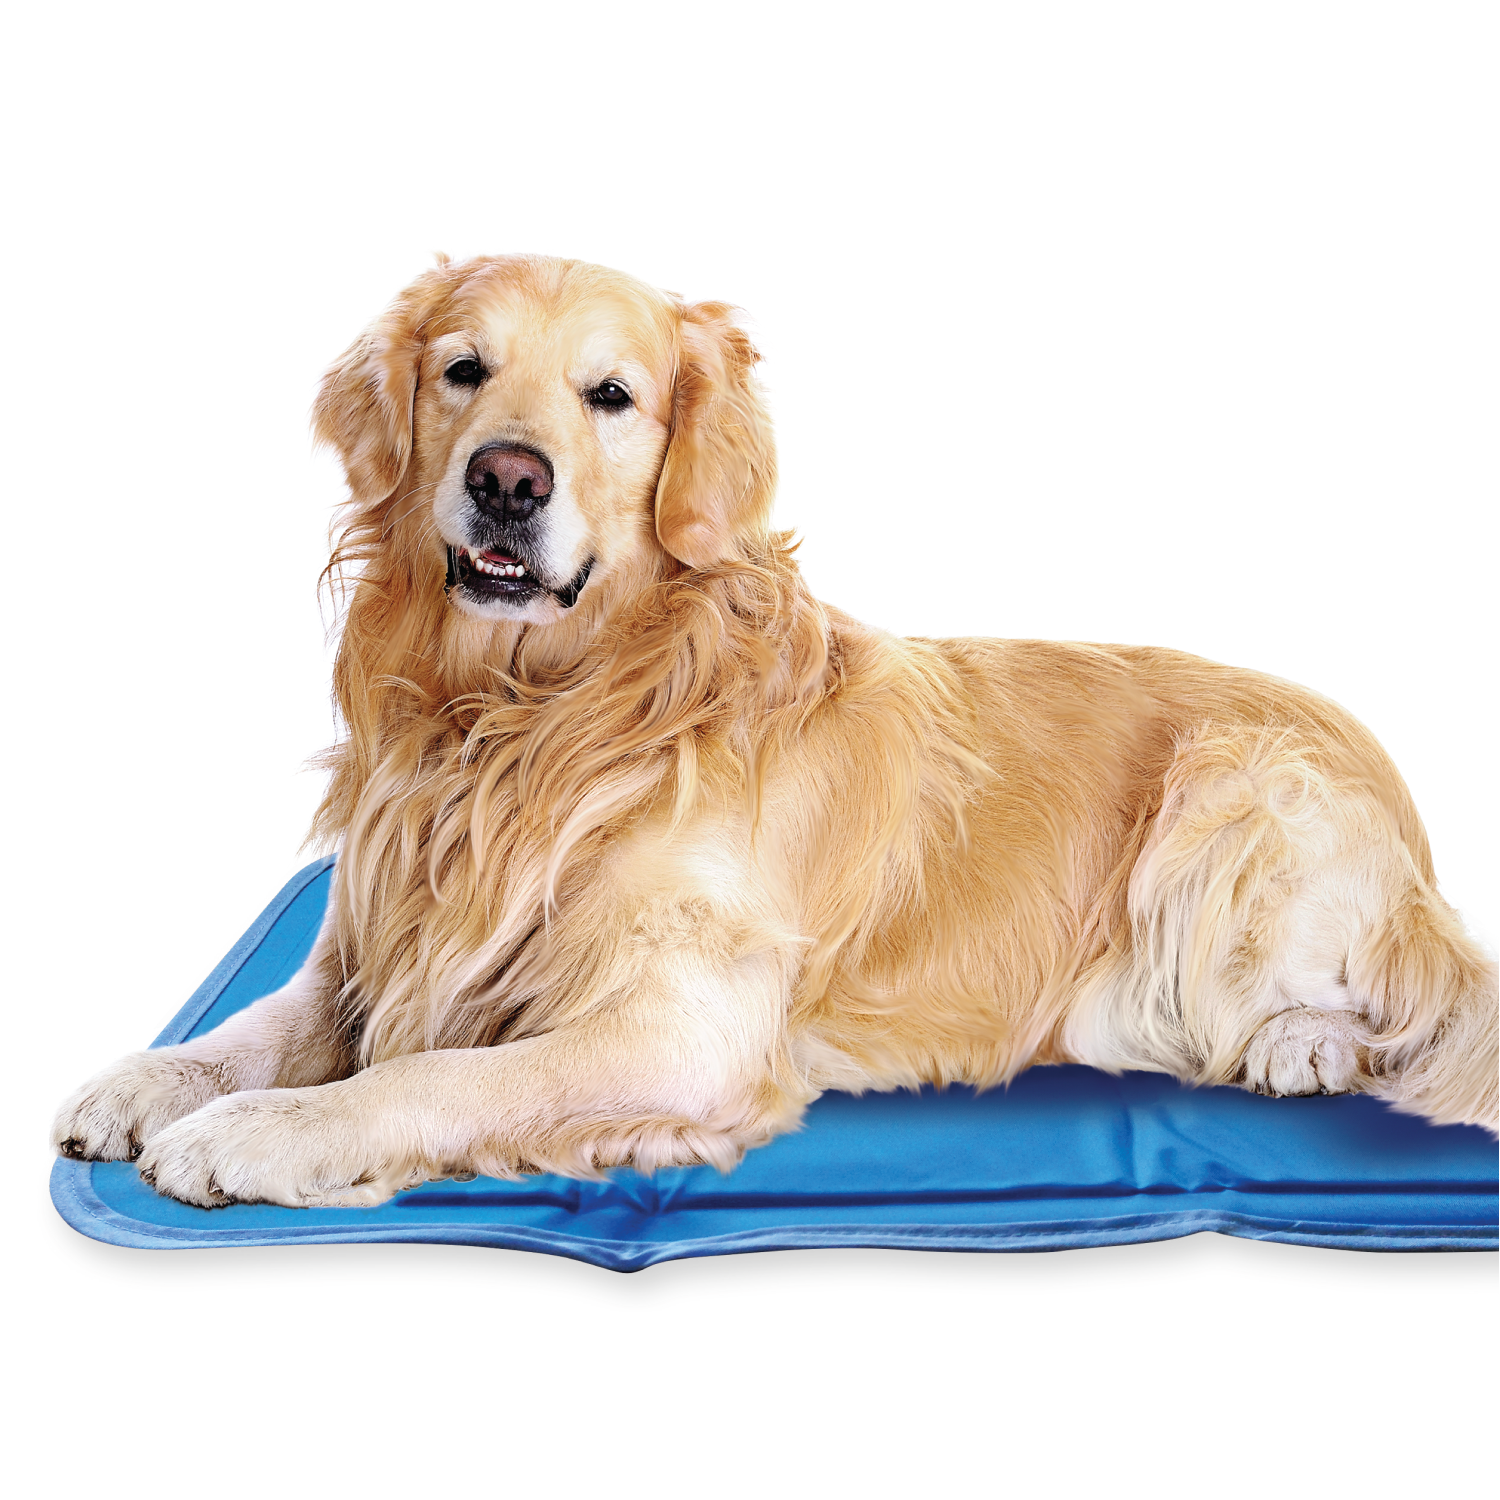 The Cool Pet Pad - Small, Green